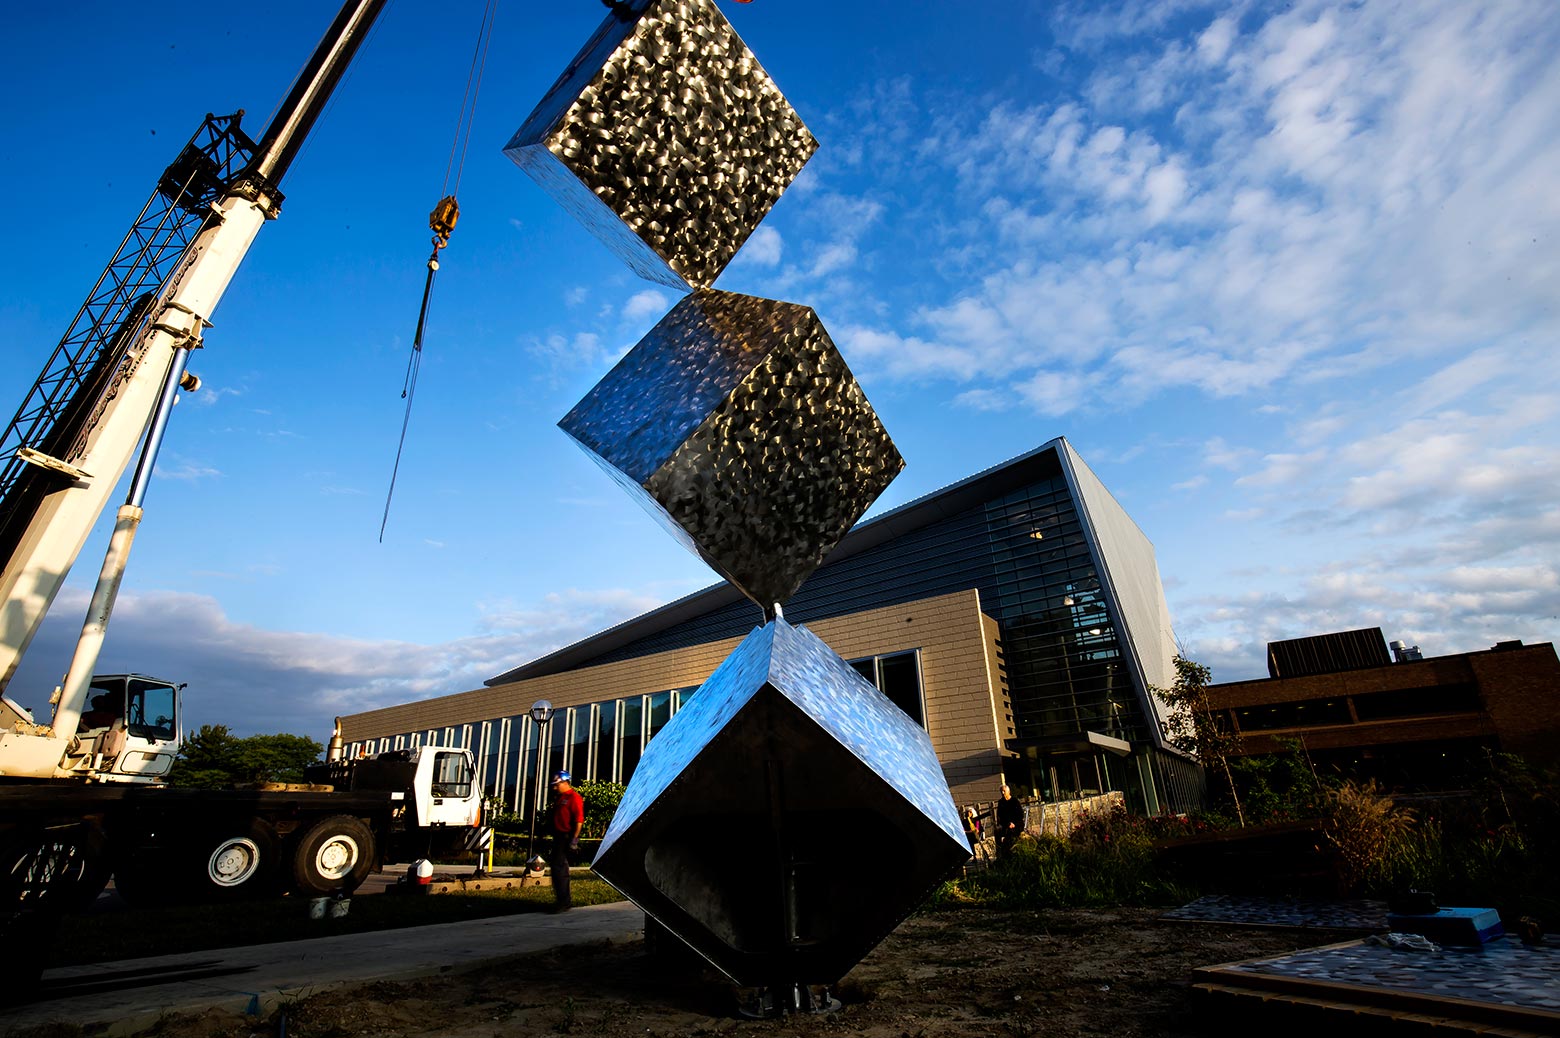 The sculpture is a 14,000 pound, 25-foot tall kinetic structure that took Philip Stewart, Pinwheel artist, two years to design.